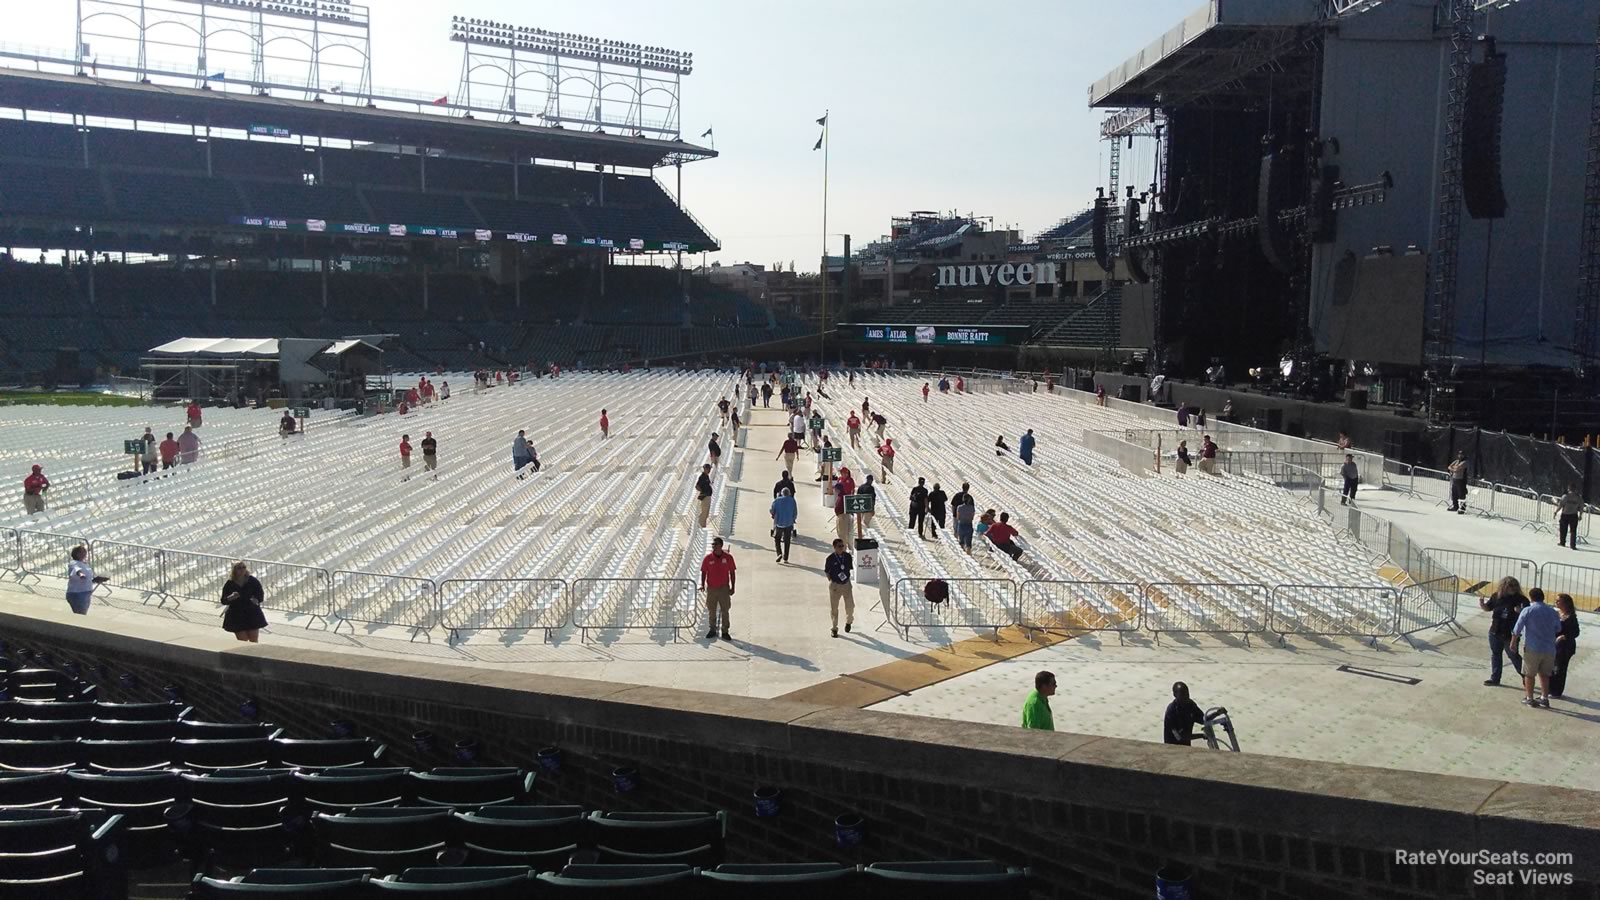 section 133, row 15 seat view  for concert - wrigley field